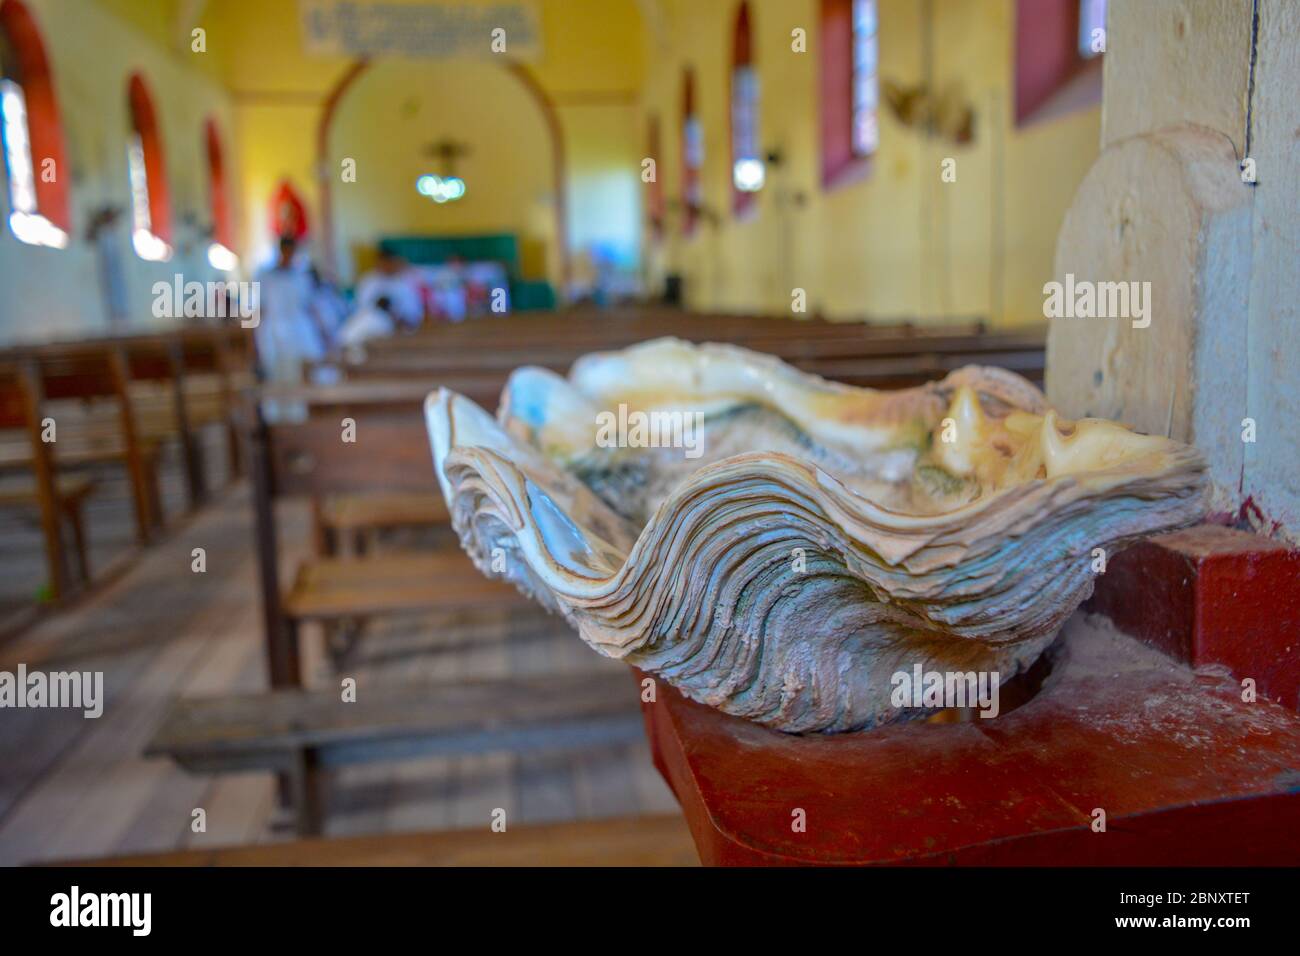 A beautiful container for holy water in church. Bowl for blessed water in cathedral, Natural huge seashell and empty seats in catholic church, indoor Stock Photo